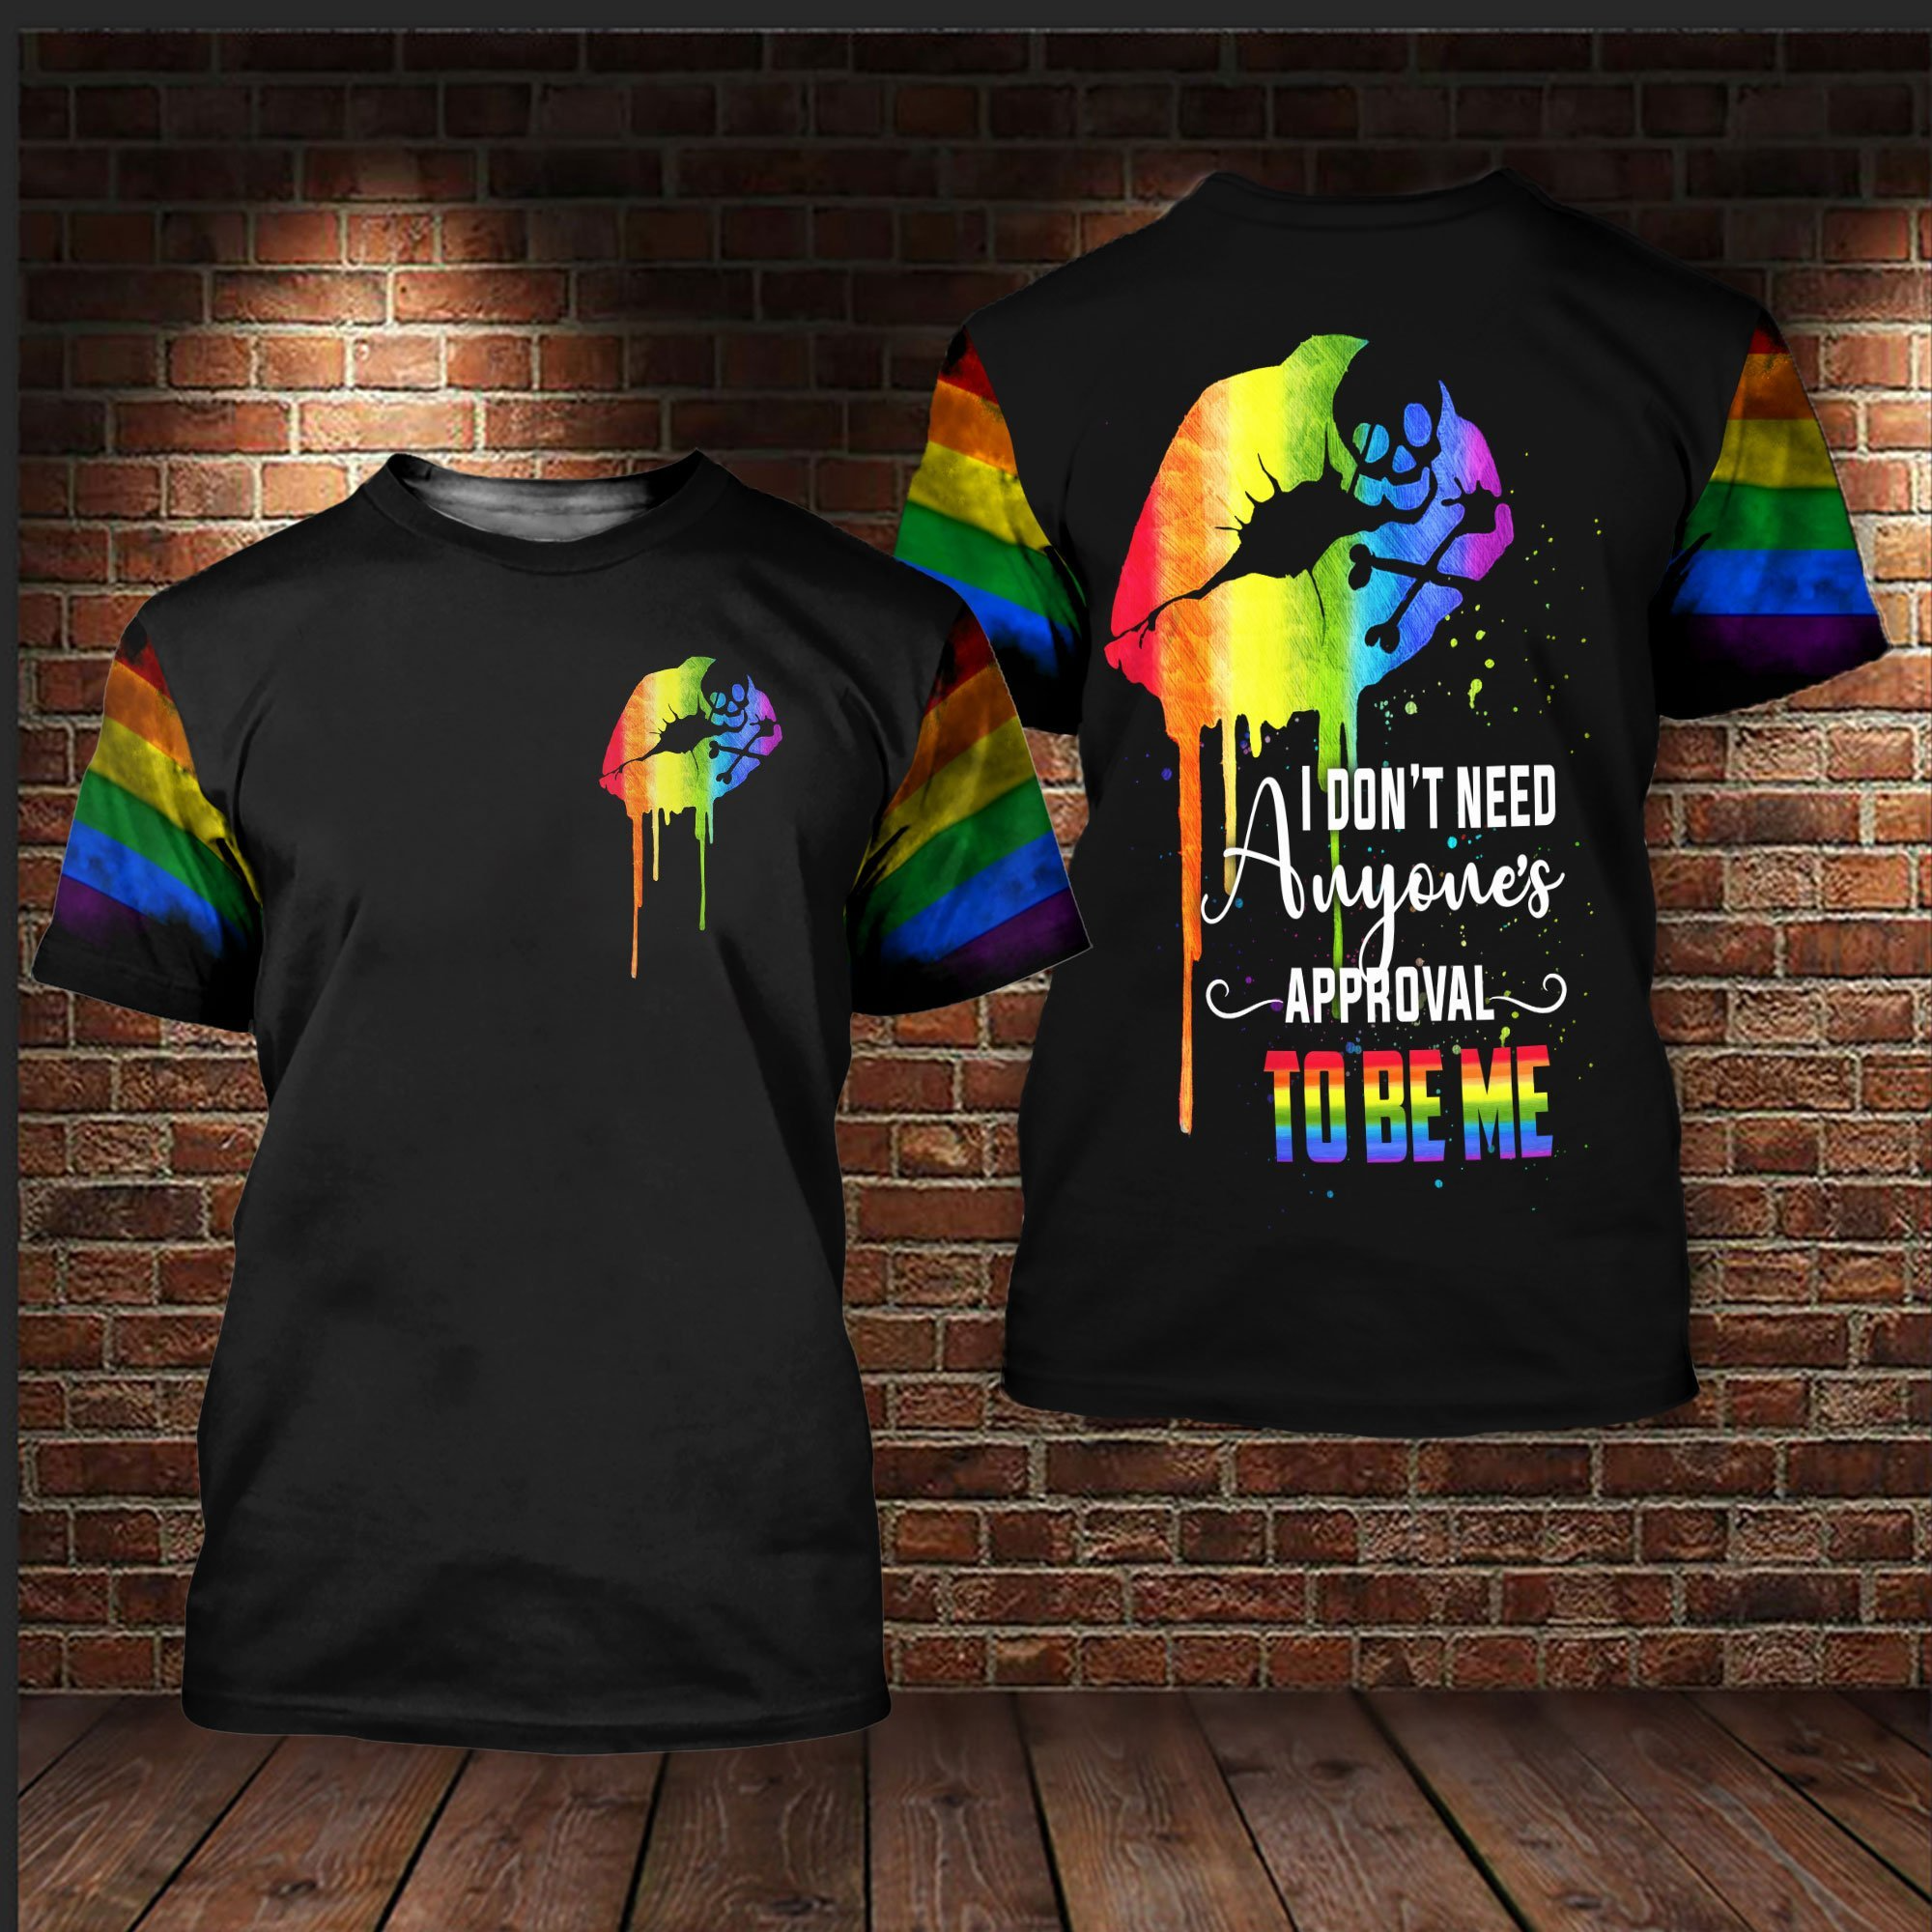 LGBT I Don’t Need Anyone’s Approval To Be Me 3D All Over Printed Shirts For LGBT Community